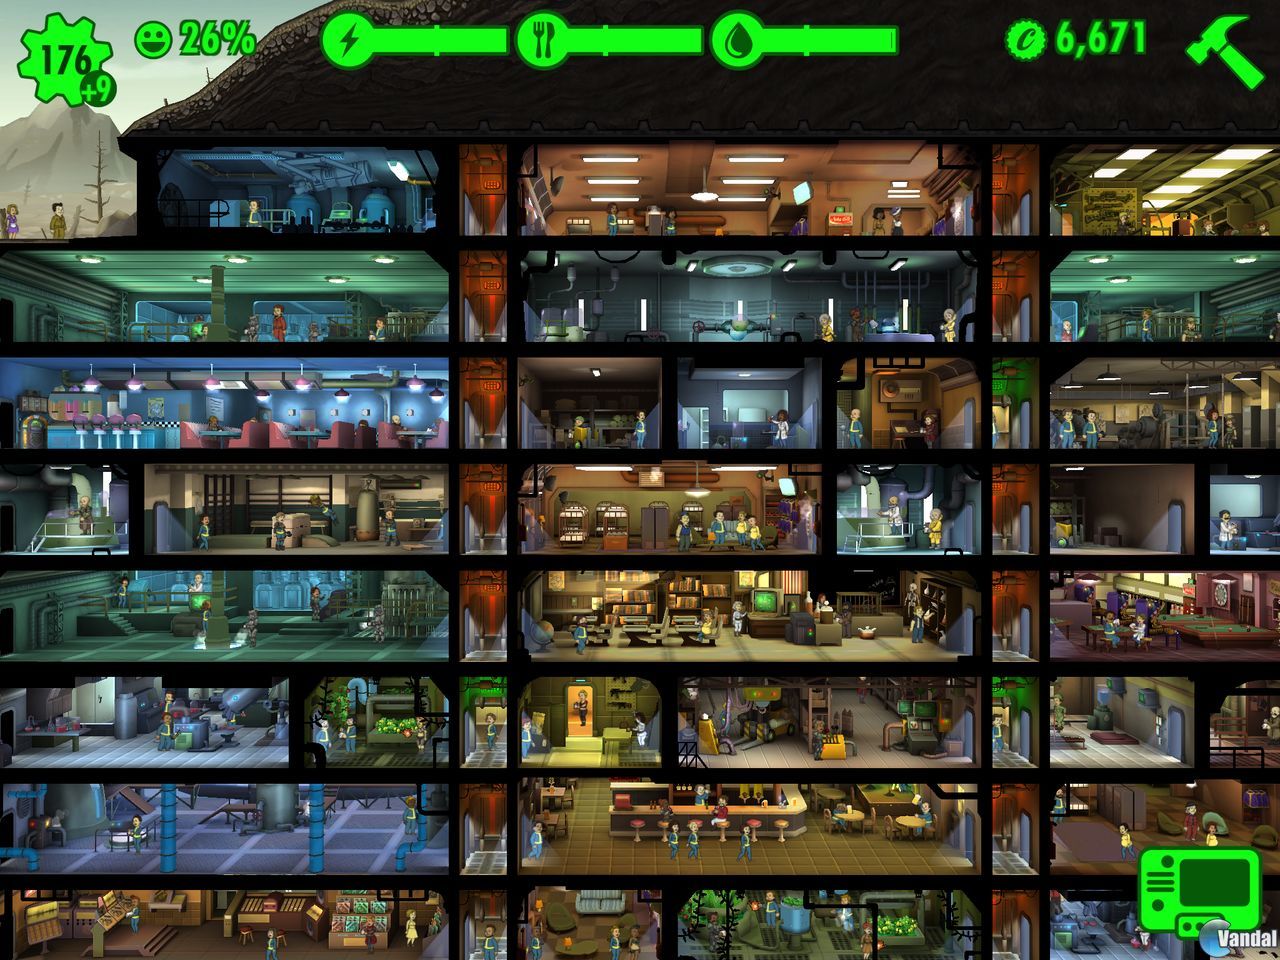 fallout shelter android to ps4